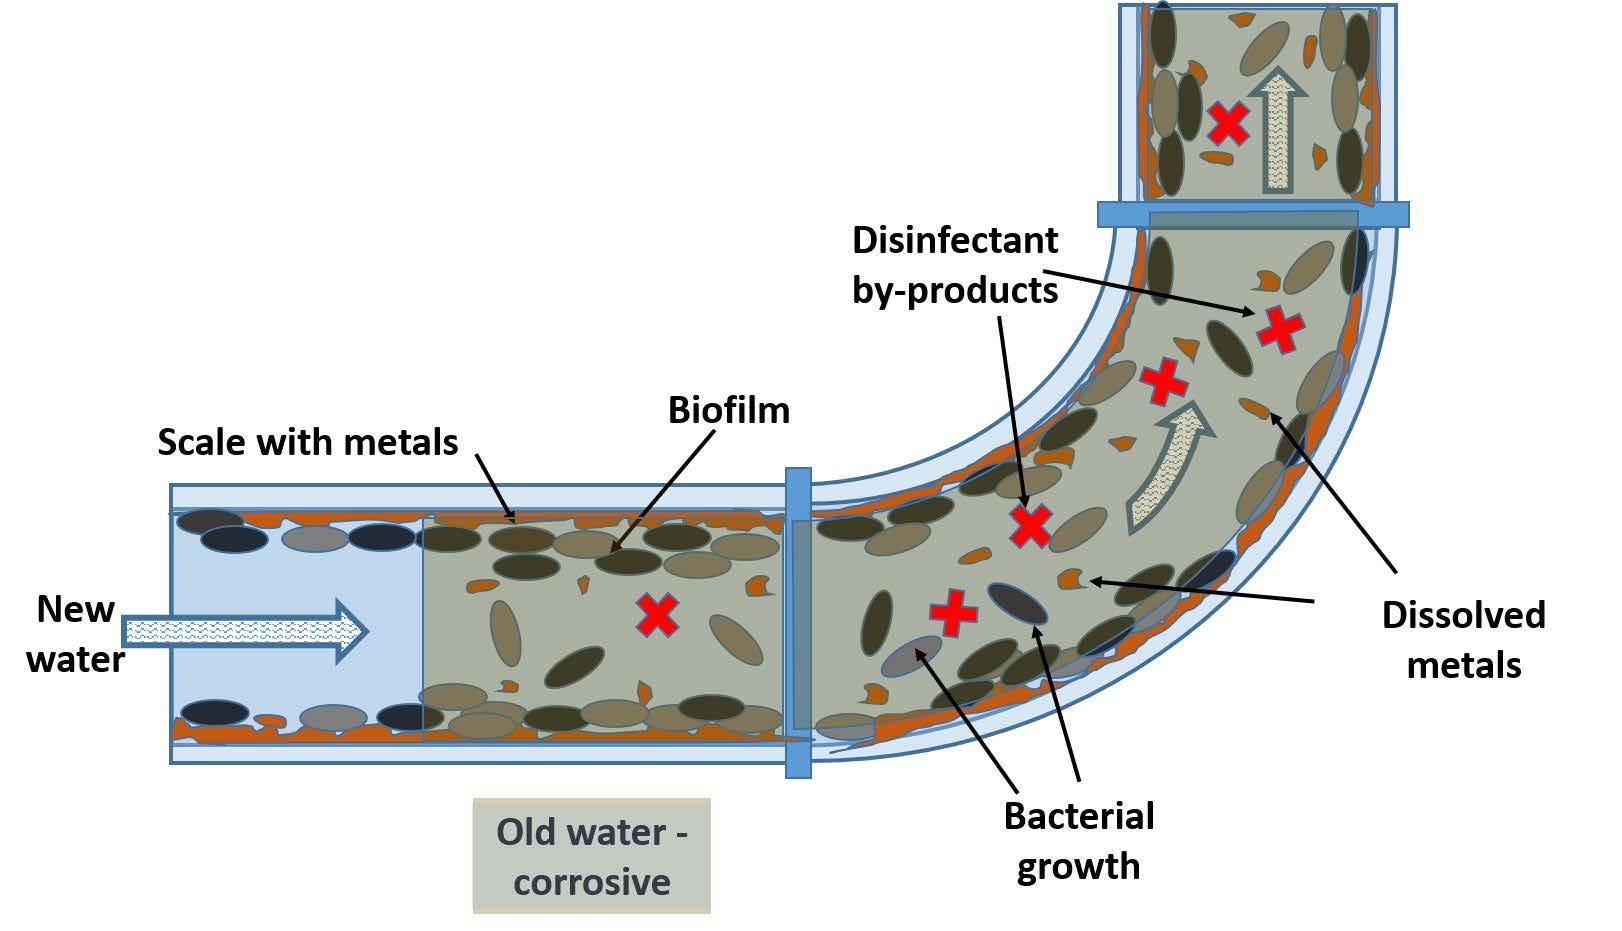 Pipe diagram showing stagnant water health risks. Image adapted from Wheaton and Proctor 2020 